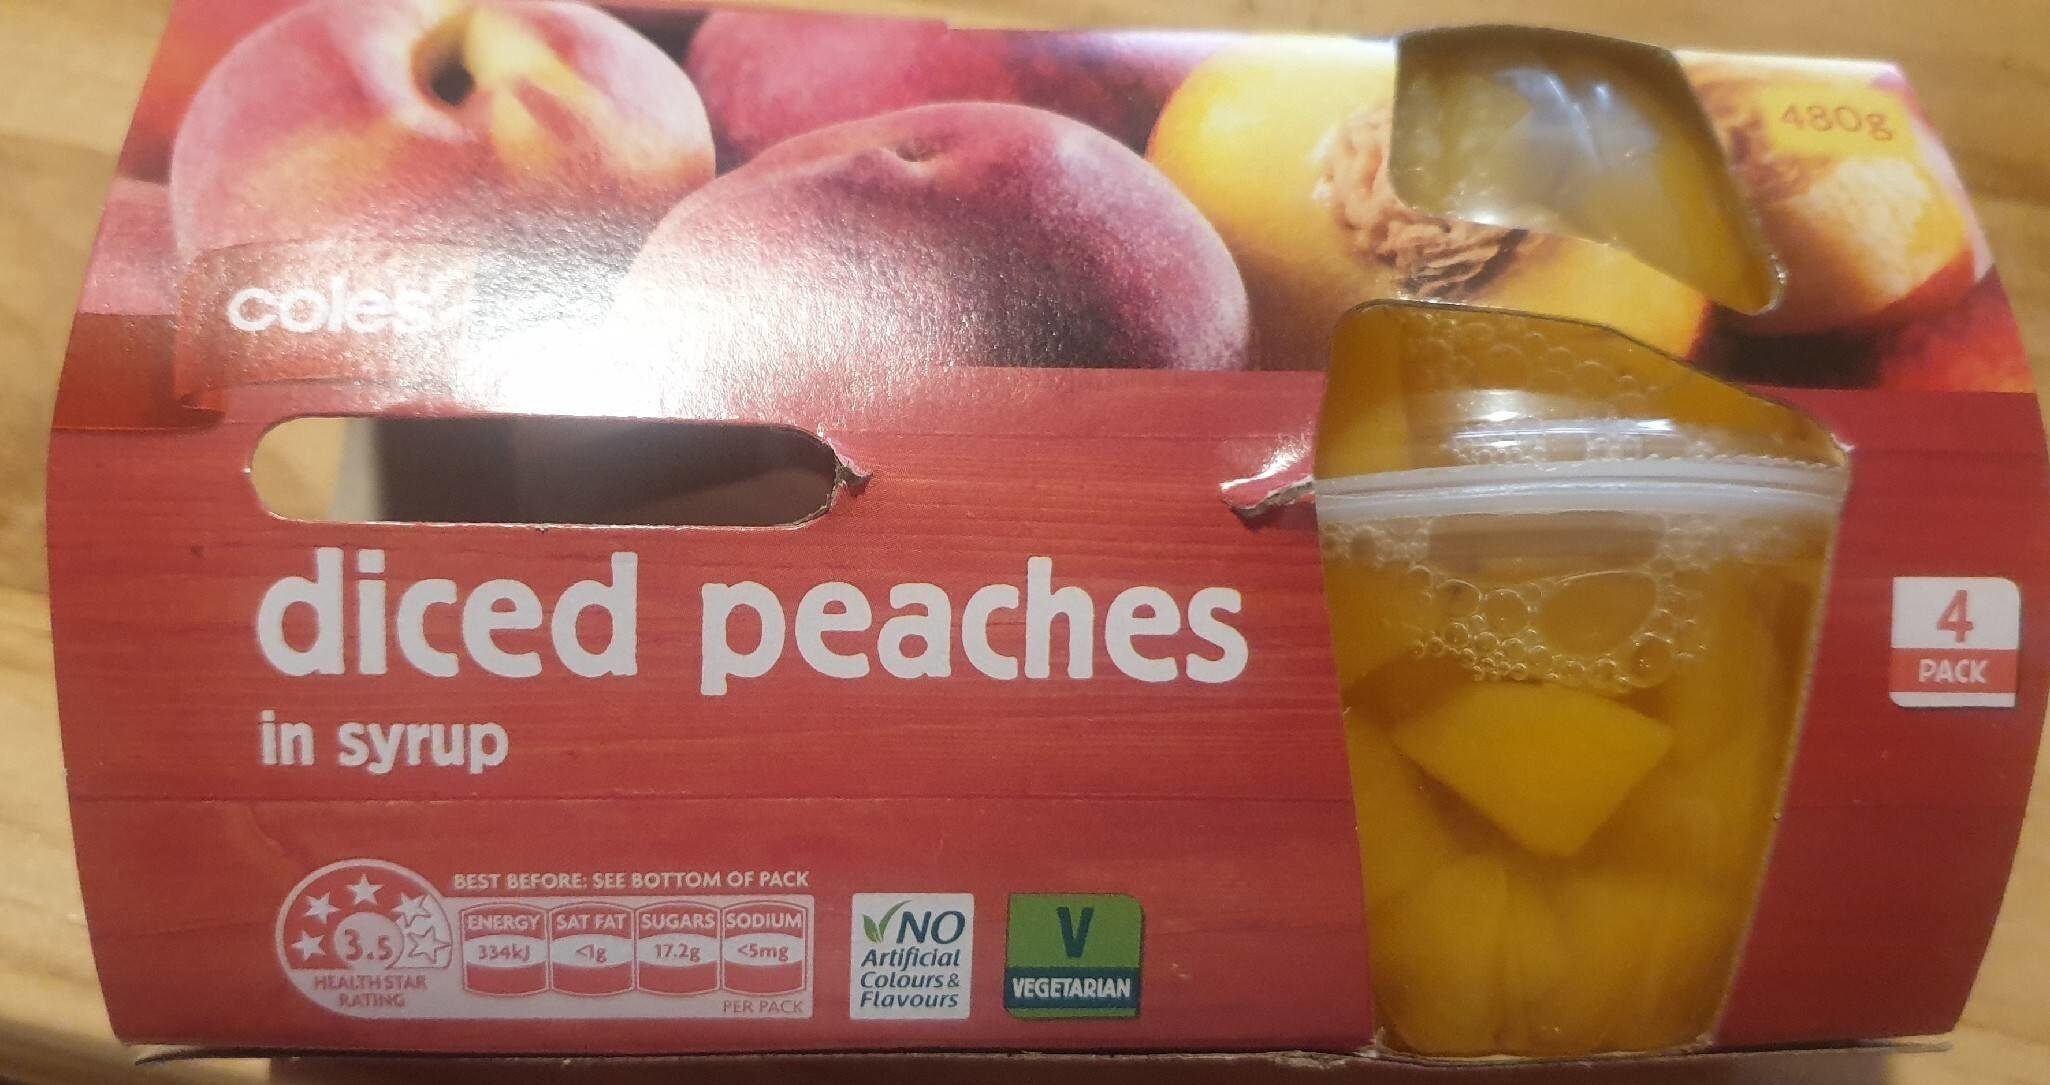 Diced Peaches in syrup - Product